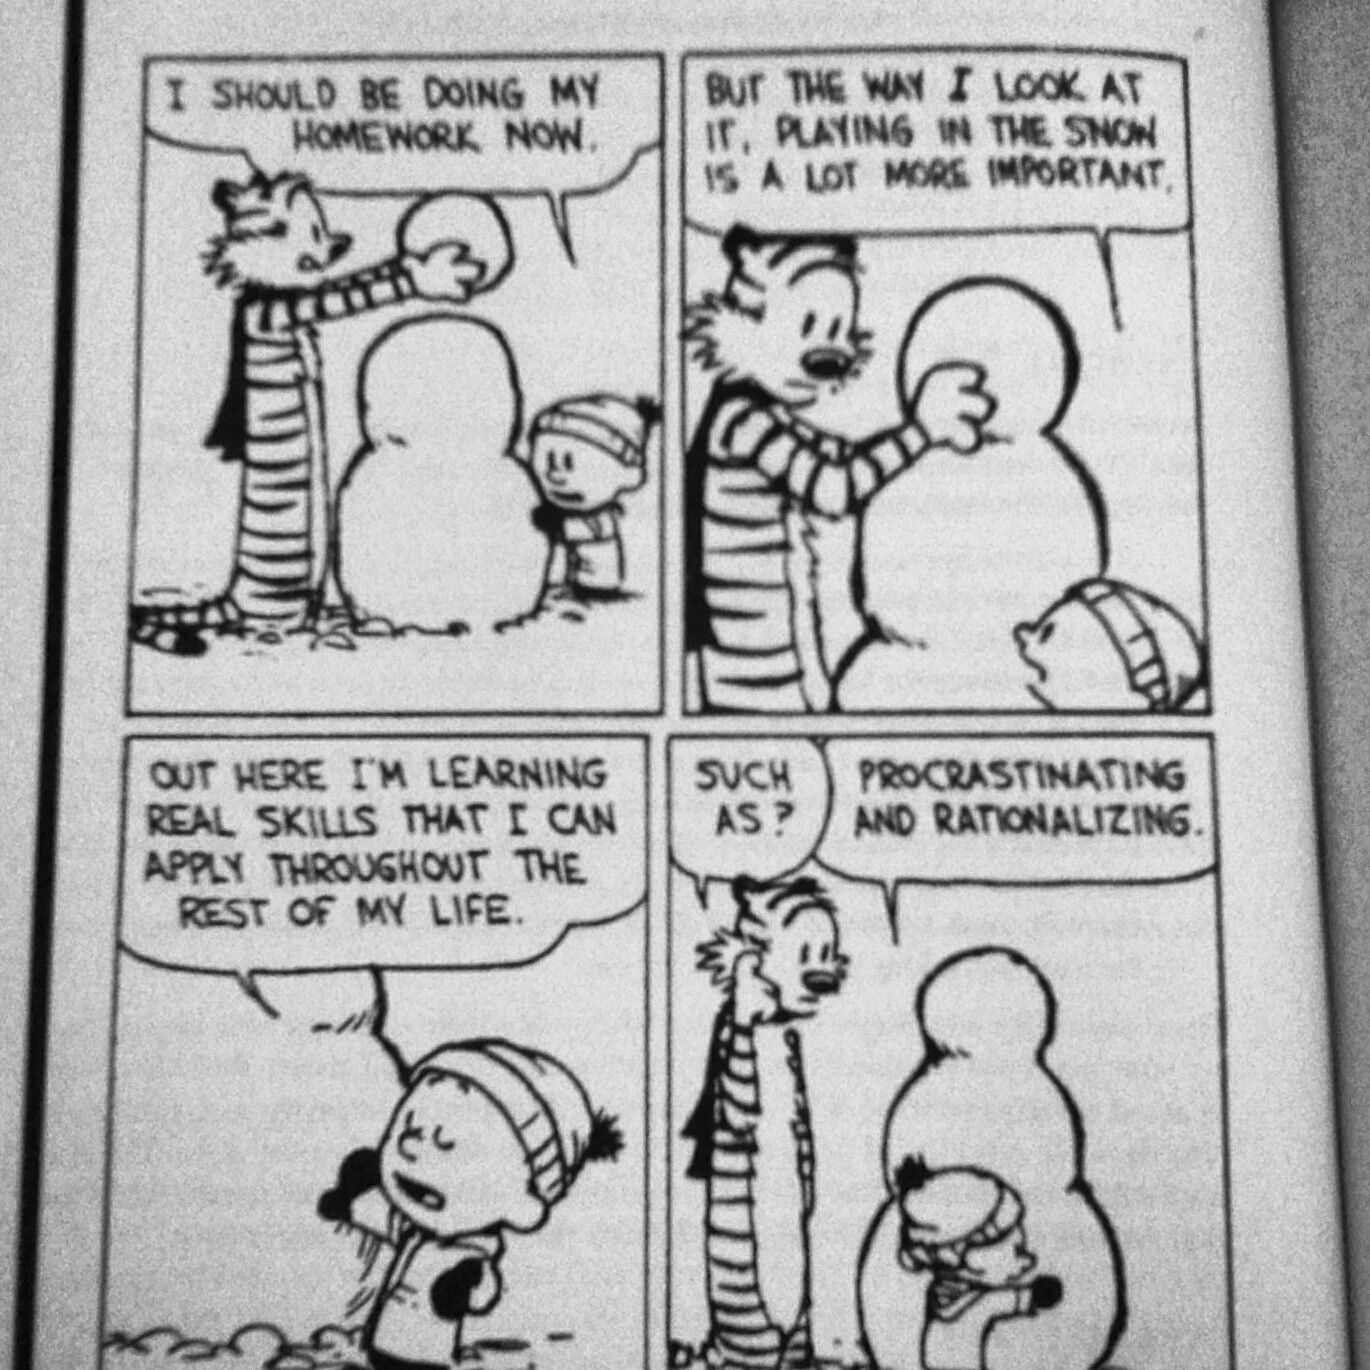 Calvin knows what's important